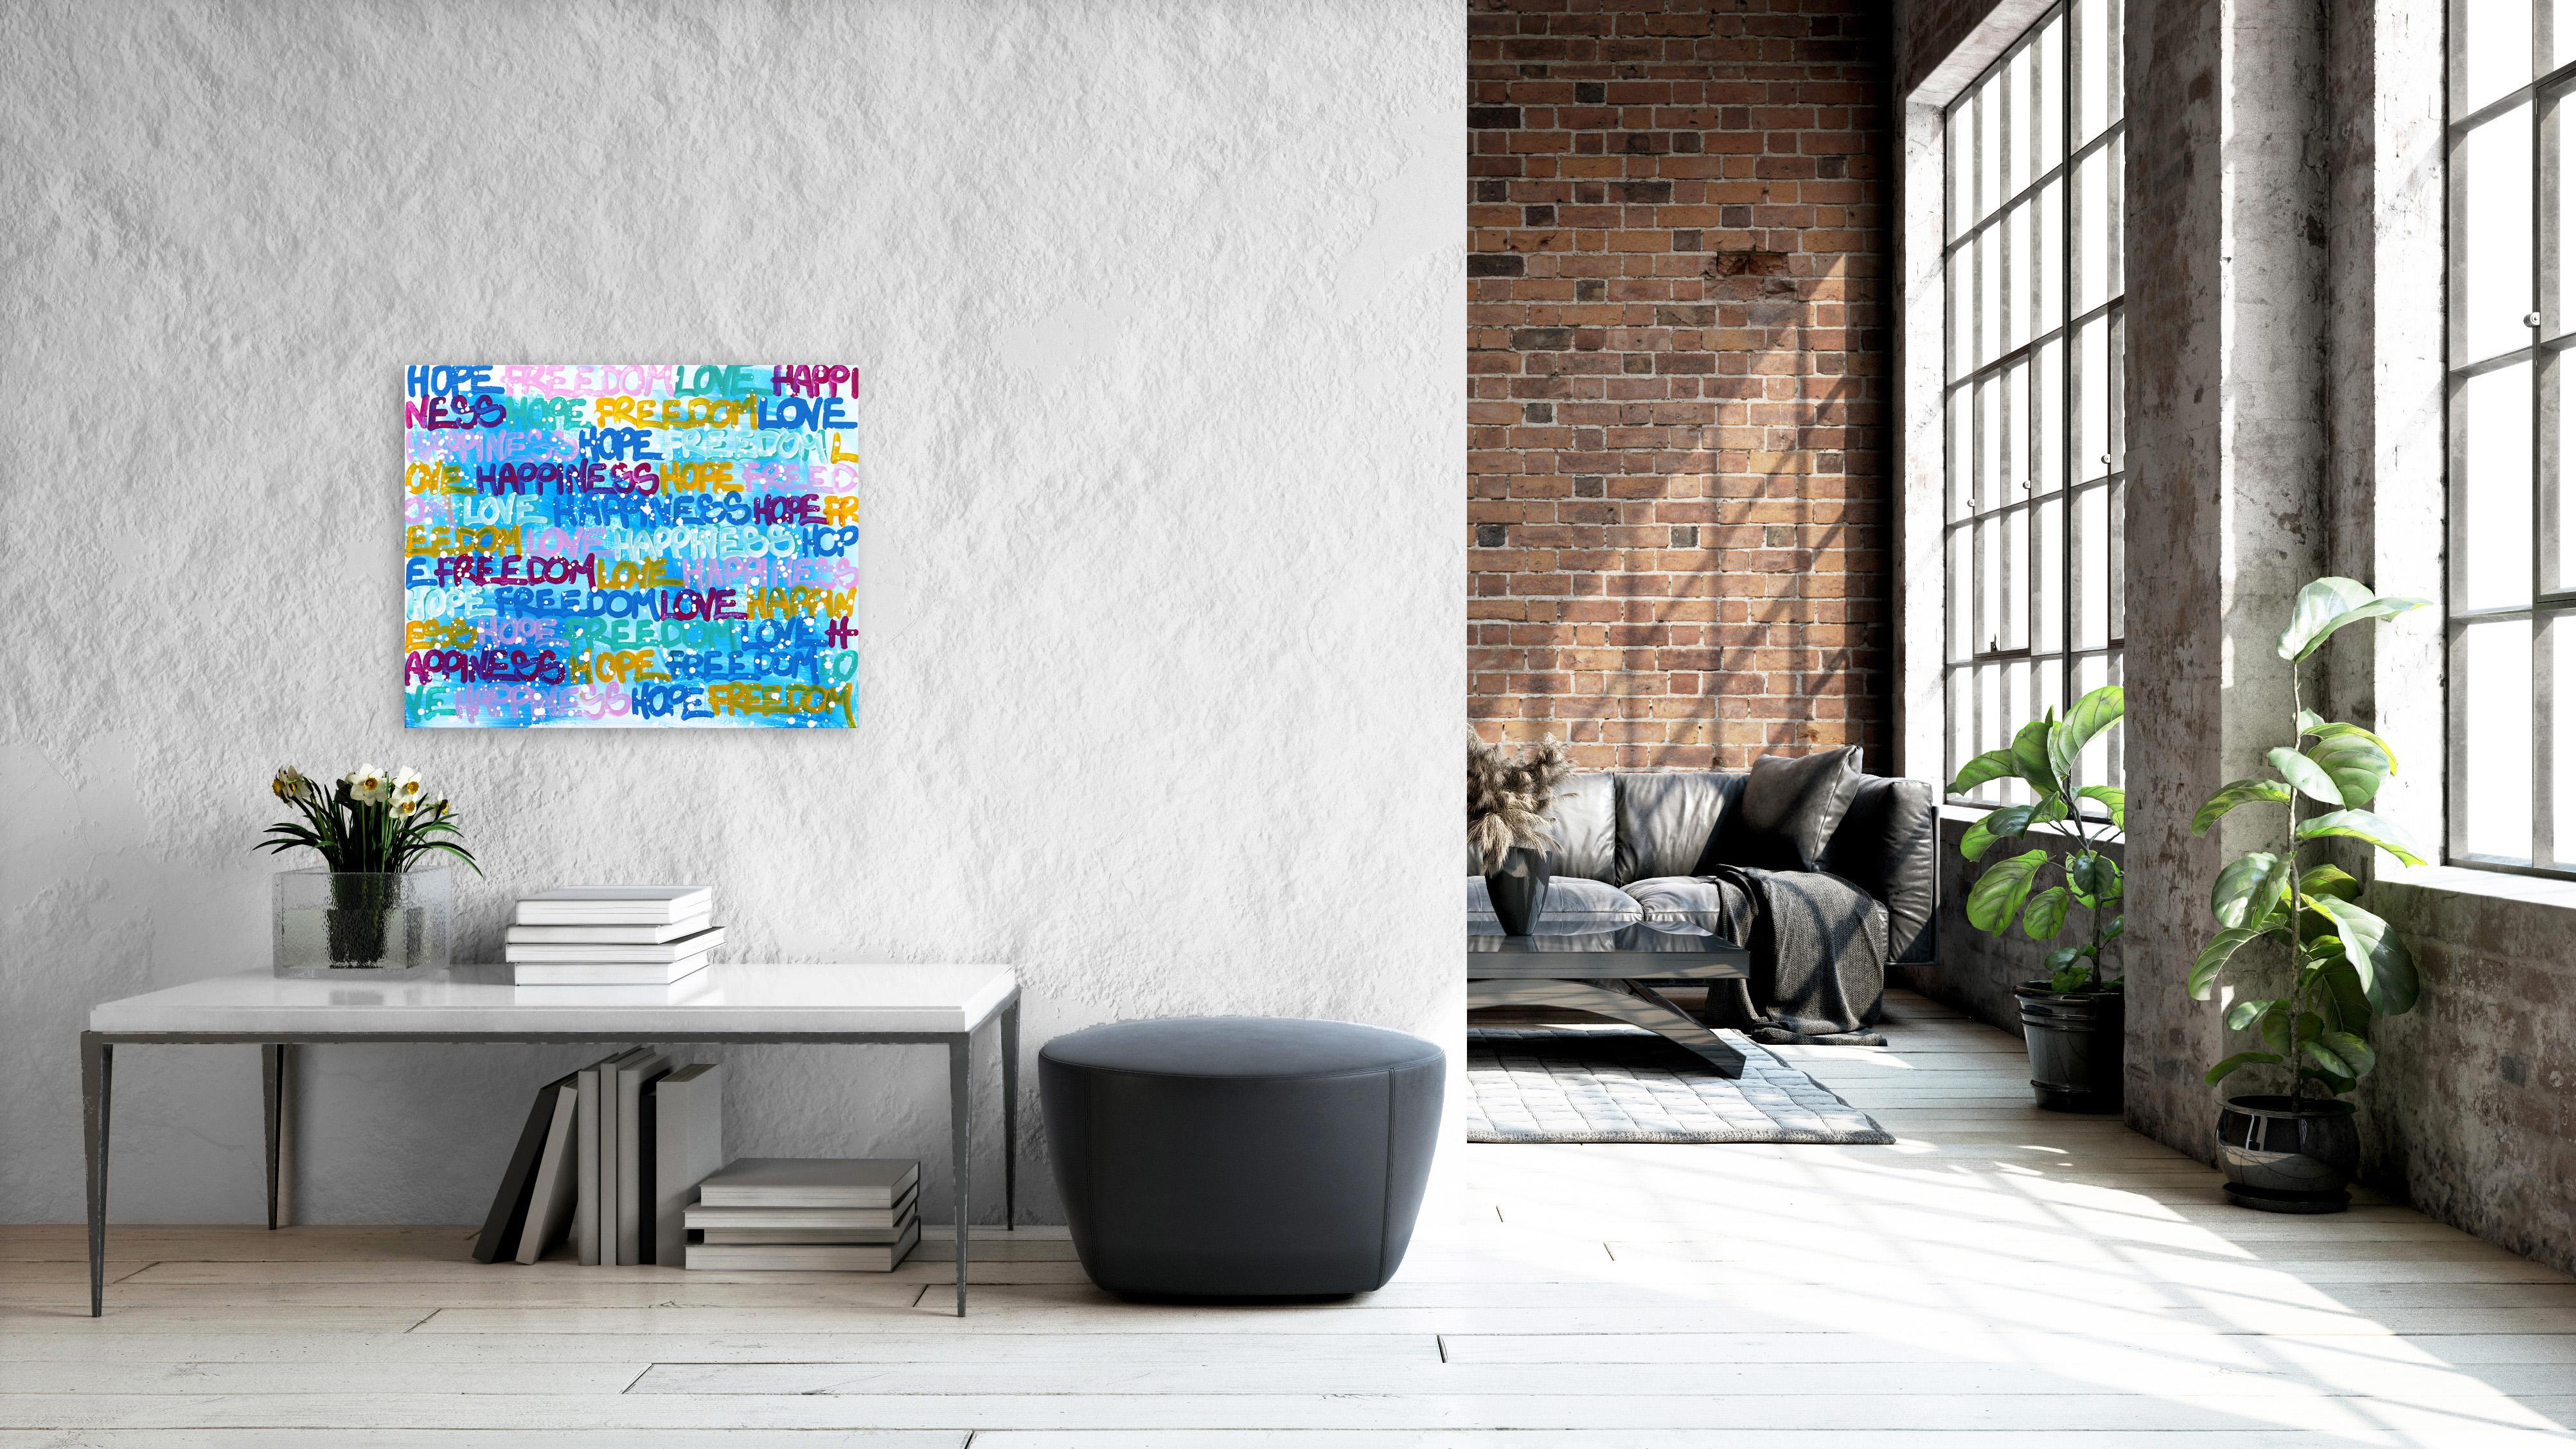 We All Want The Same Thing - Original Colorful Graffiti Inspired Painting - Street Art Art by Amber Goldhammer